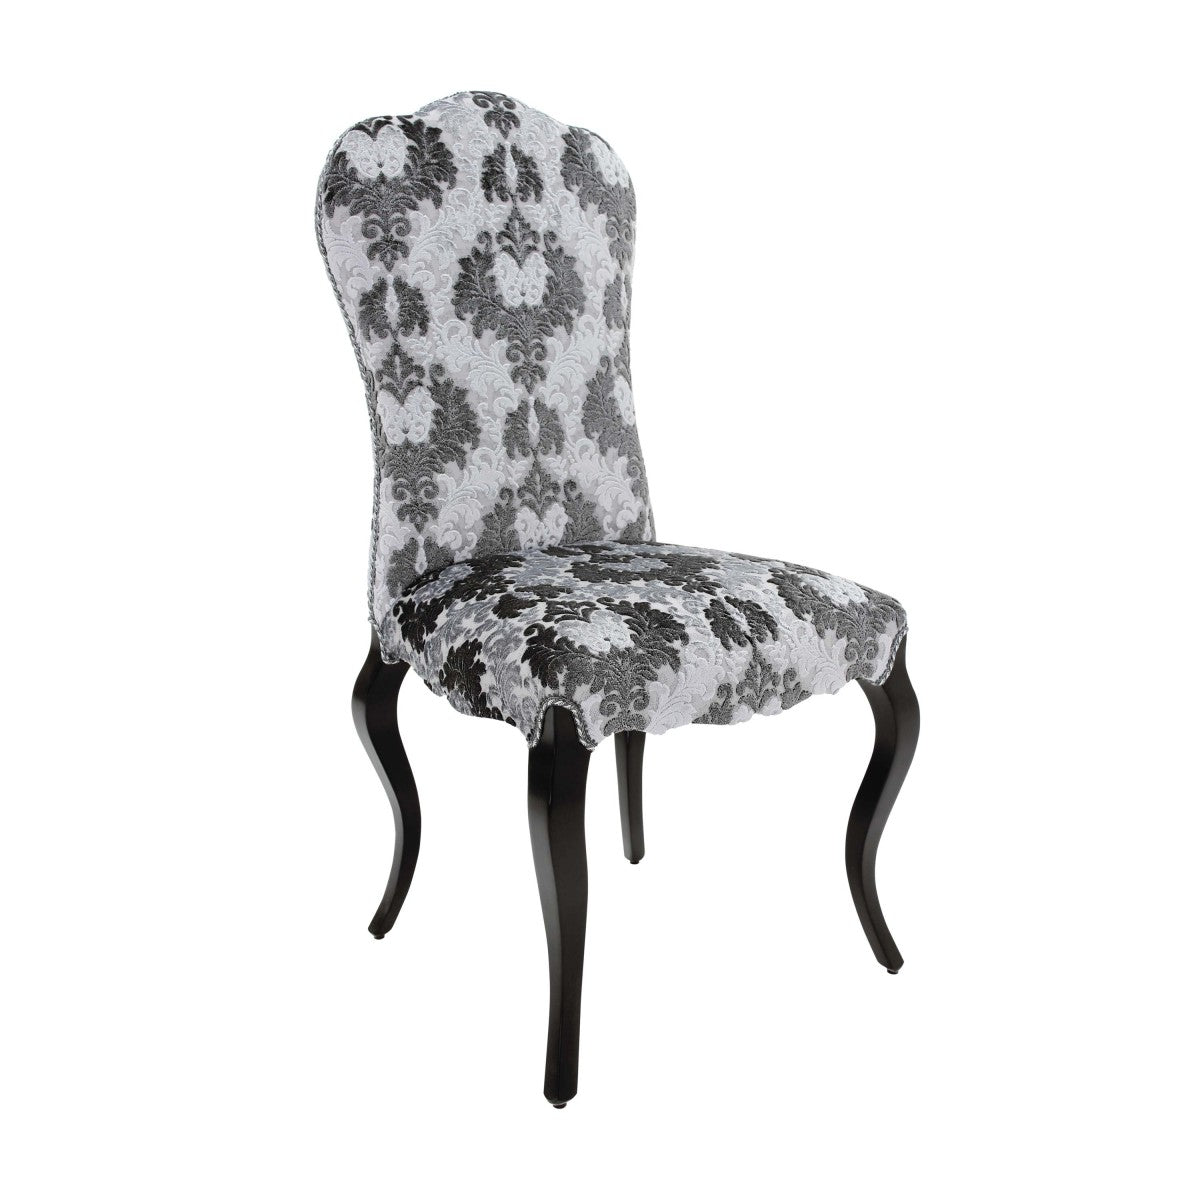 Doge Bespoke Upholstered Classic Style Dining Chair MS182S Custom Made To Order